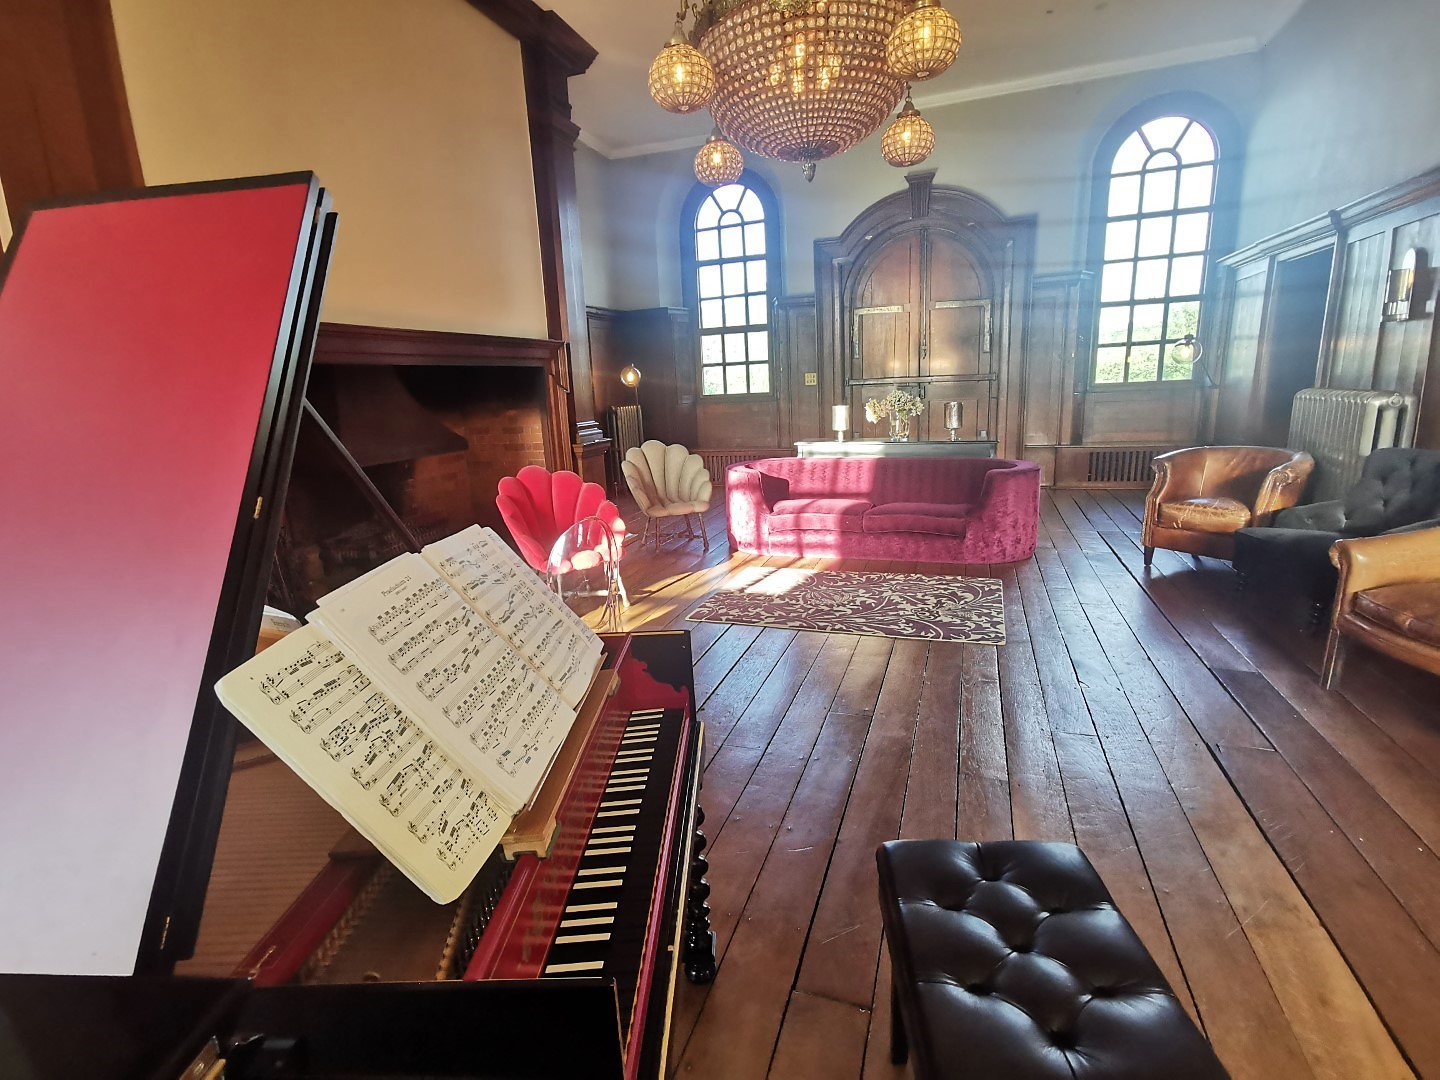 Harpsichord in the main hall of Finchcocks